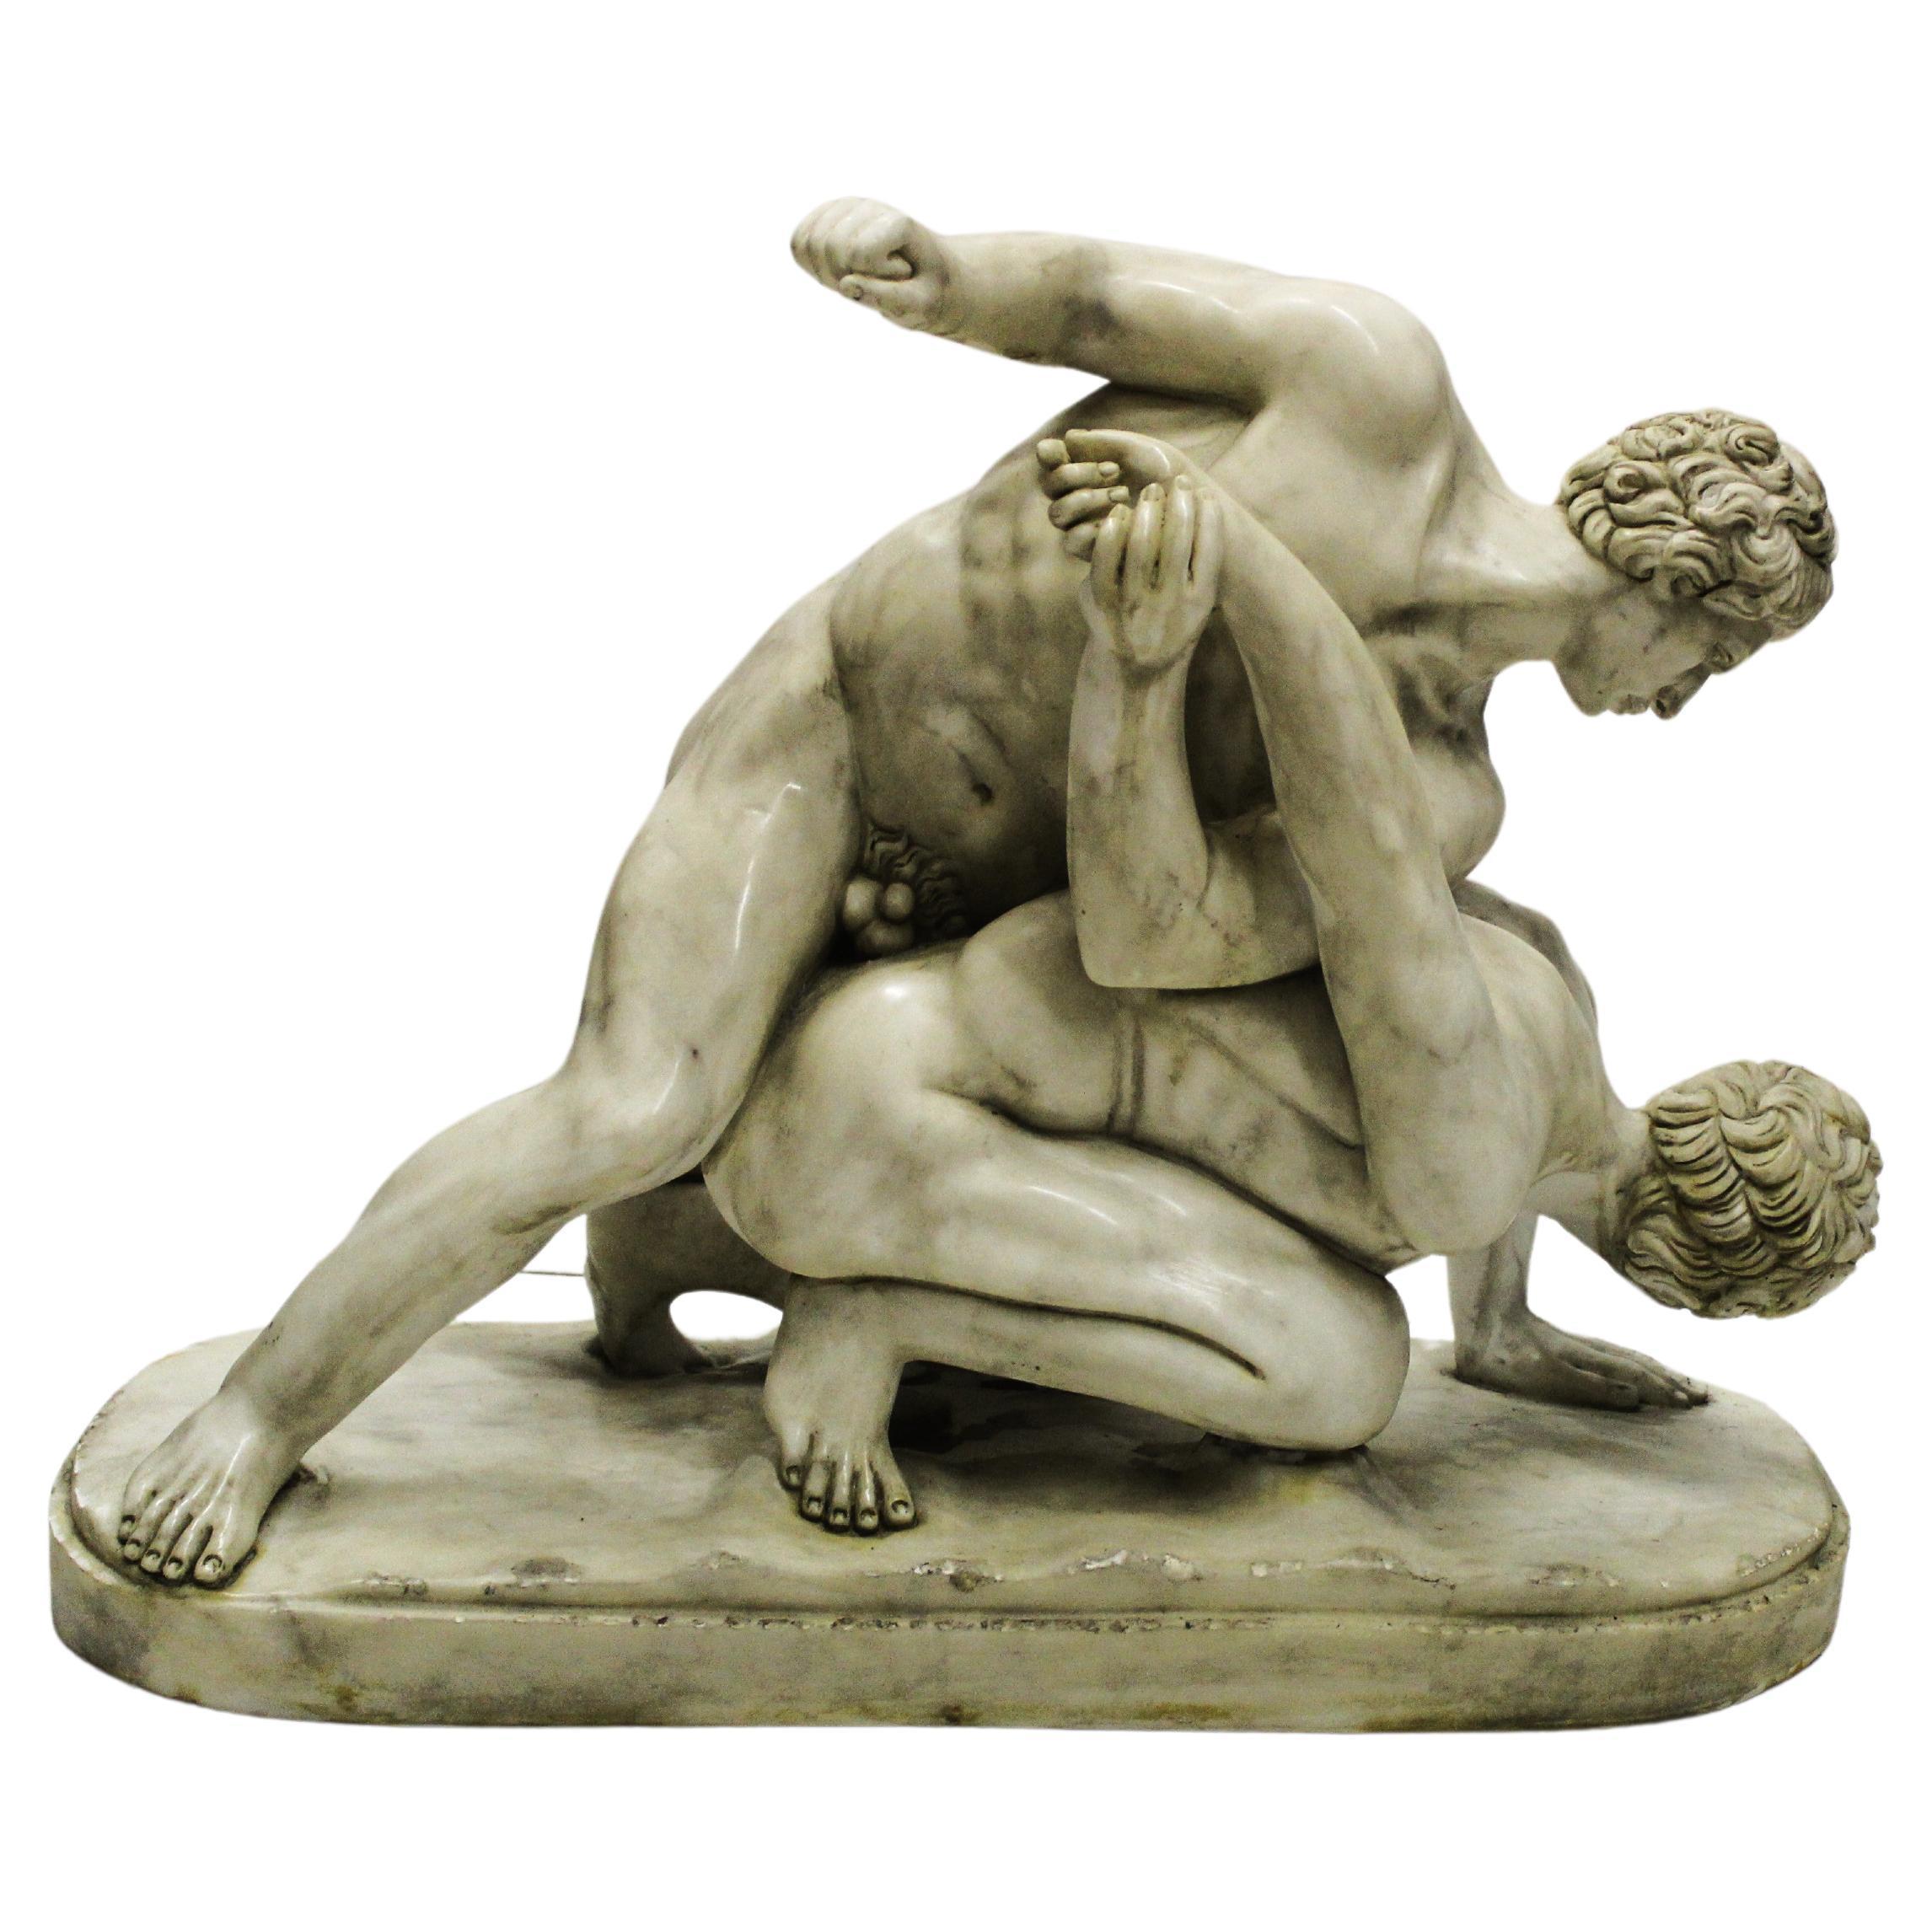 Sculpture of Wrestlers in marble. ADDITIONAL PHOTOS, INFORMATION OF THE LOT AND SHIPPING INFORMATION CAN BE REQUEST BY SENDING AN EMAIL. Indicative shipping costs in Italy: 220€ and Europe: 450€. Tags: Lottatori. luchadores. Lutteurs.